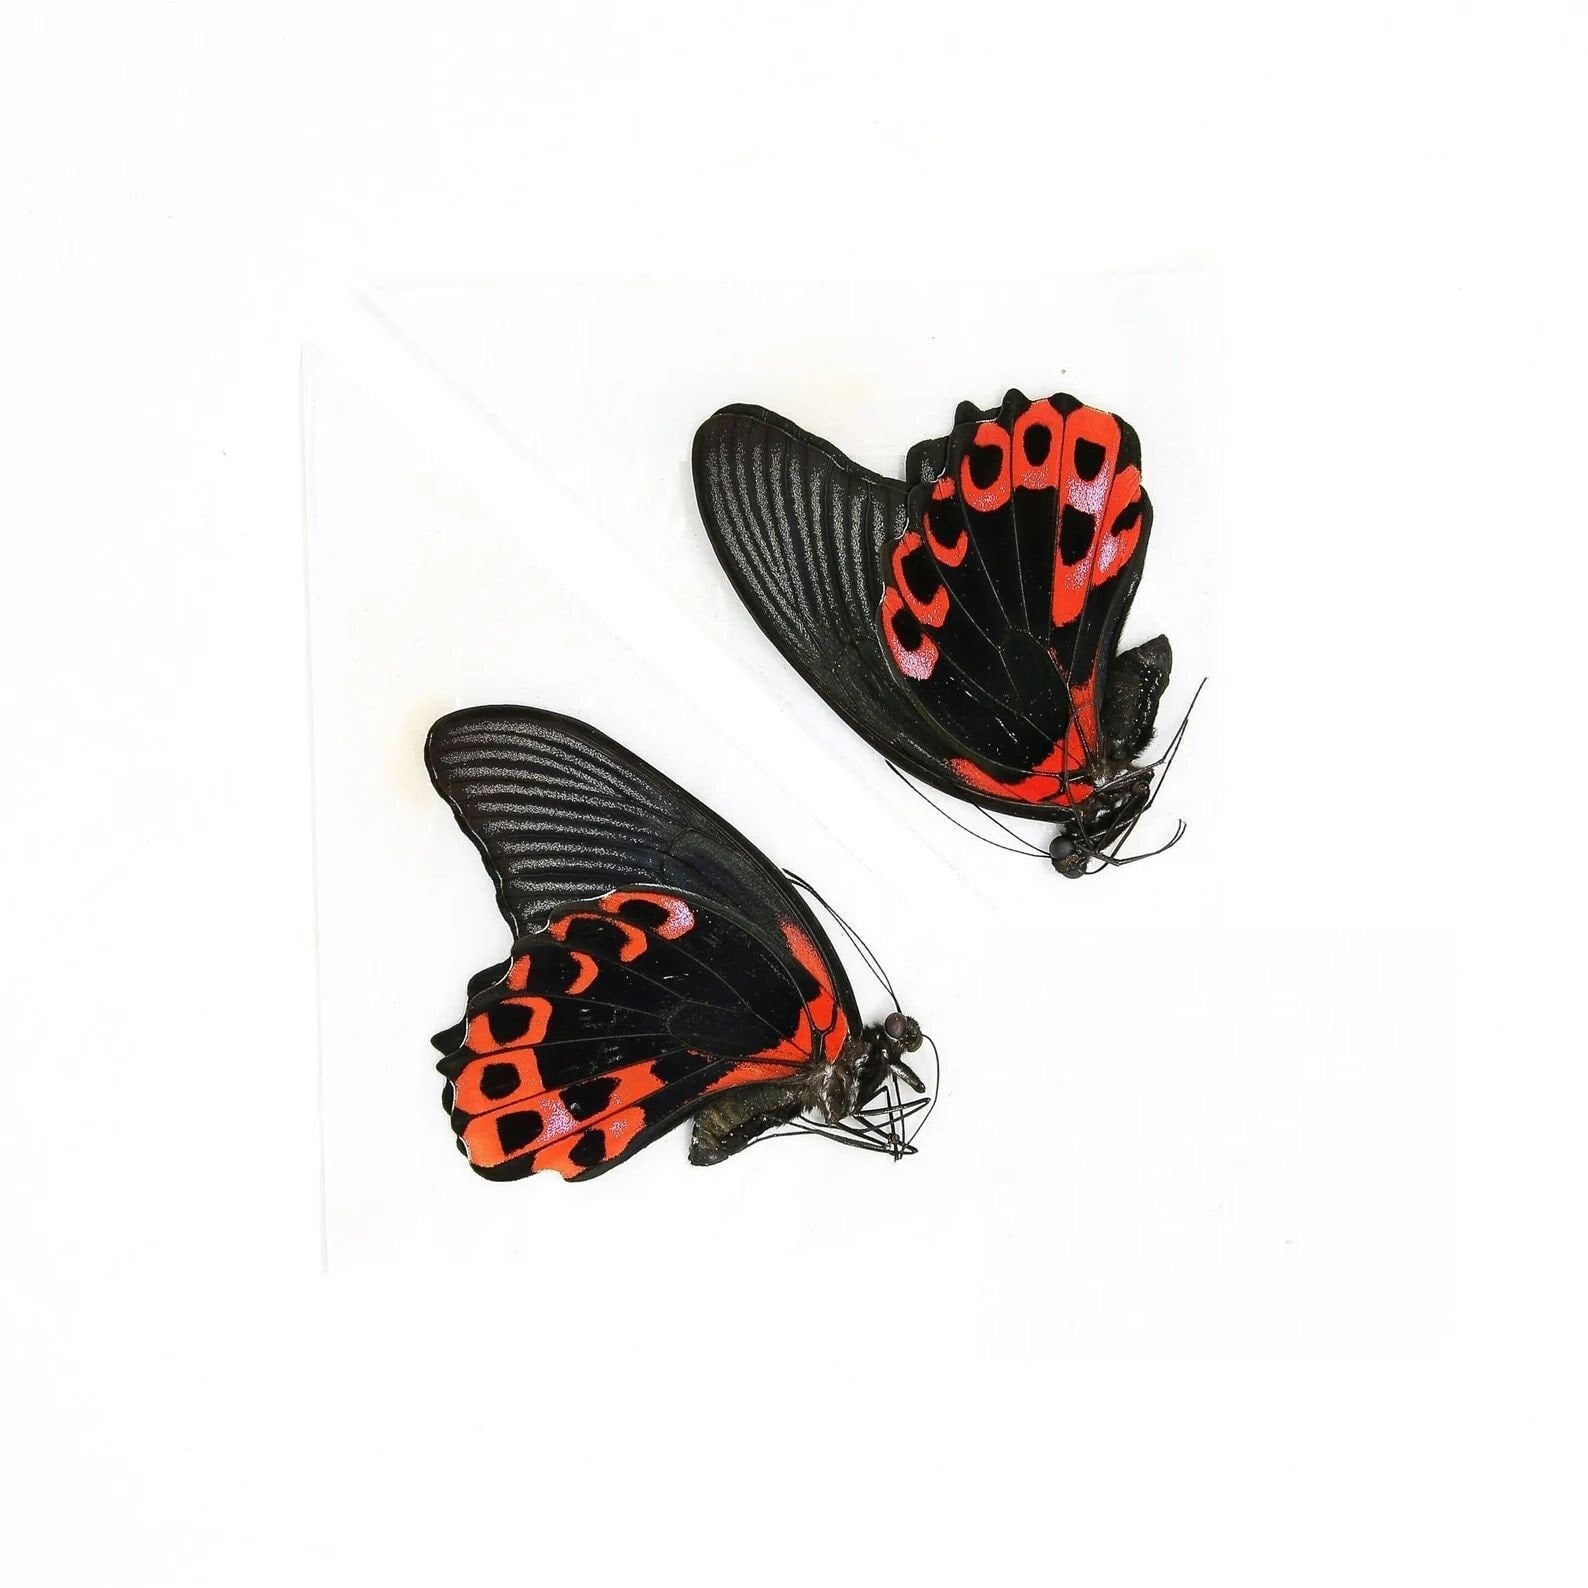 Two (2) Papilio rumanzovia "Scarlet Mormon" A1 Real Dry-Preserved Butterflies, Unmounted Entomology Taxidermy Specimens